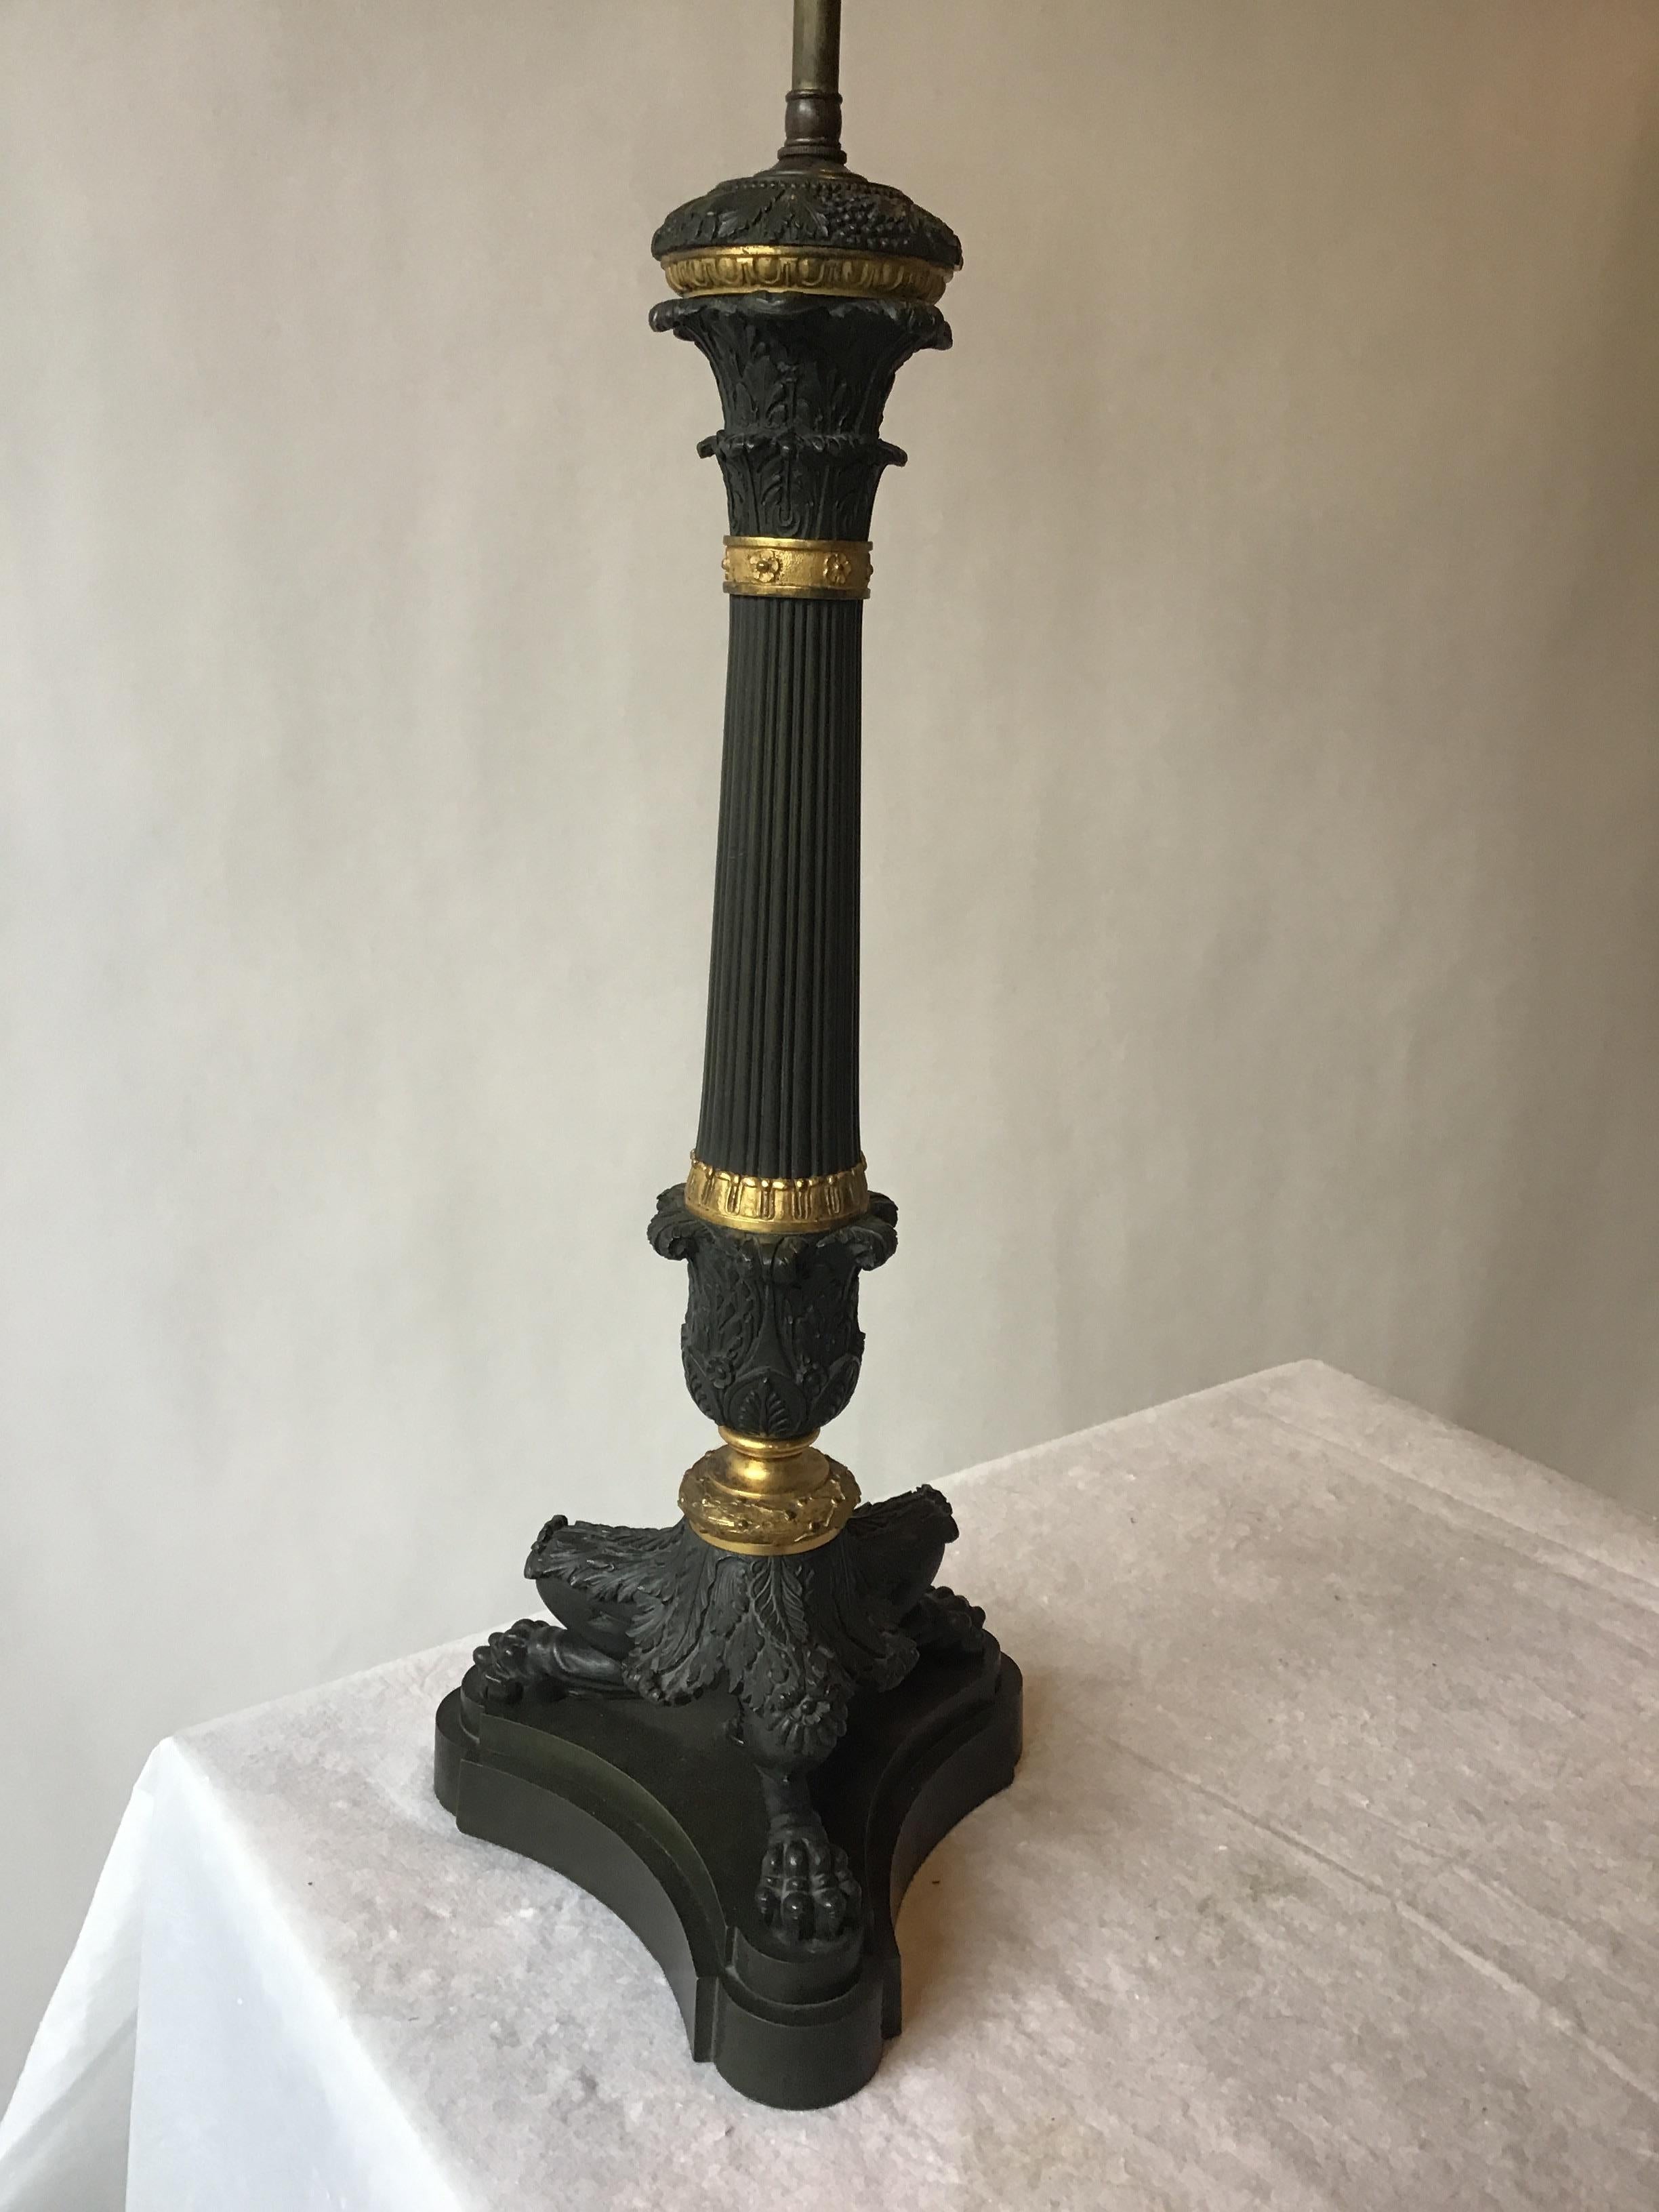 1880s French bronze Empire candlestick lamp.